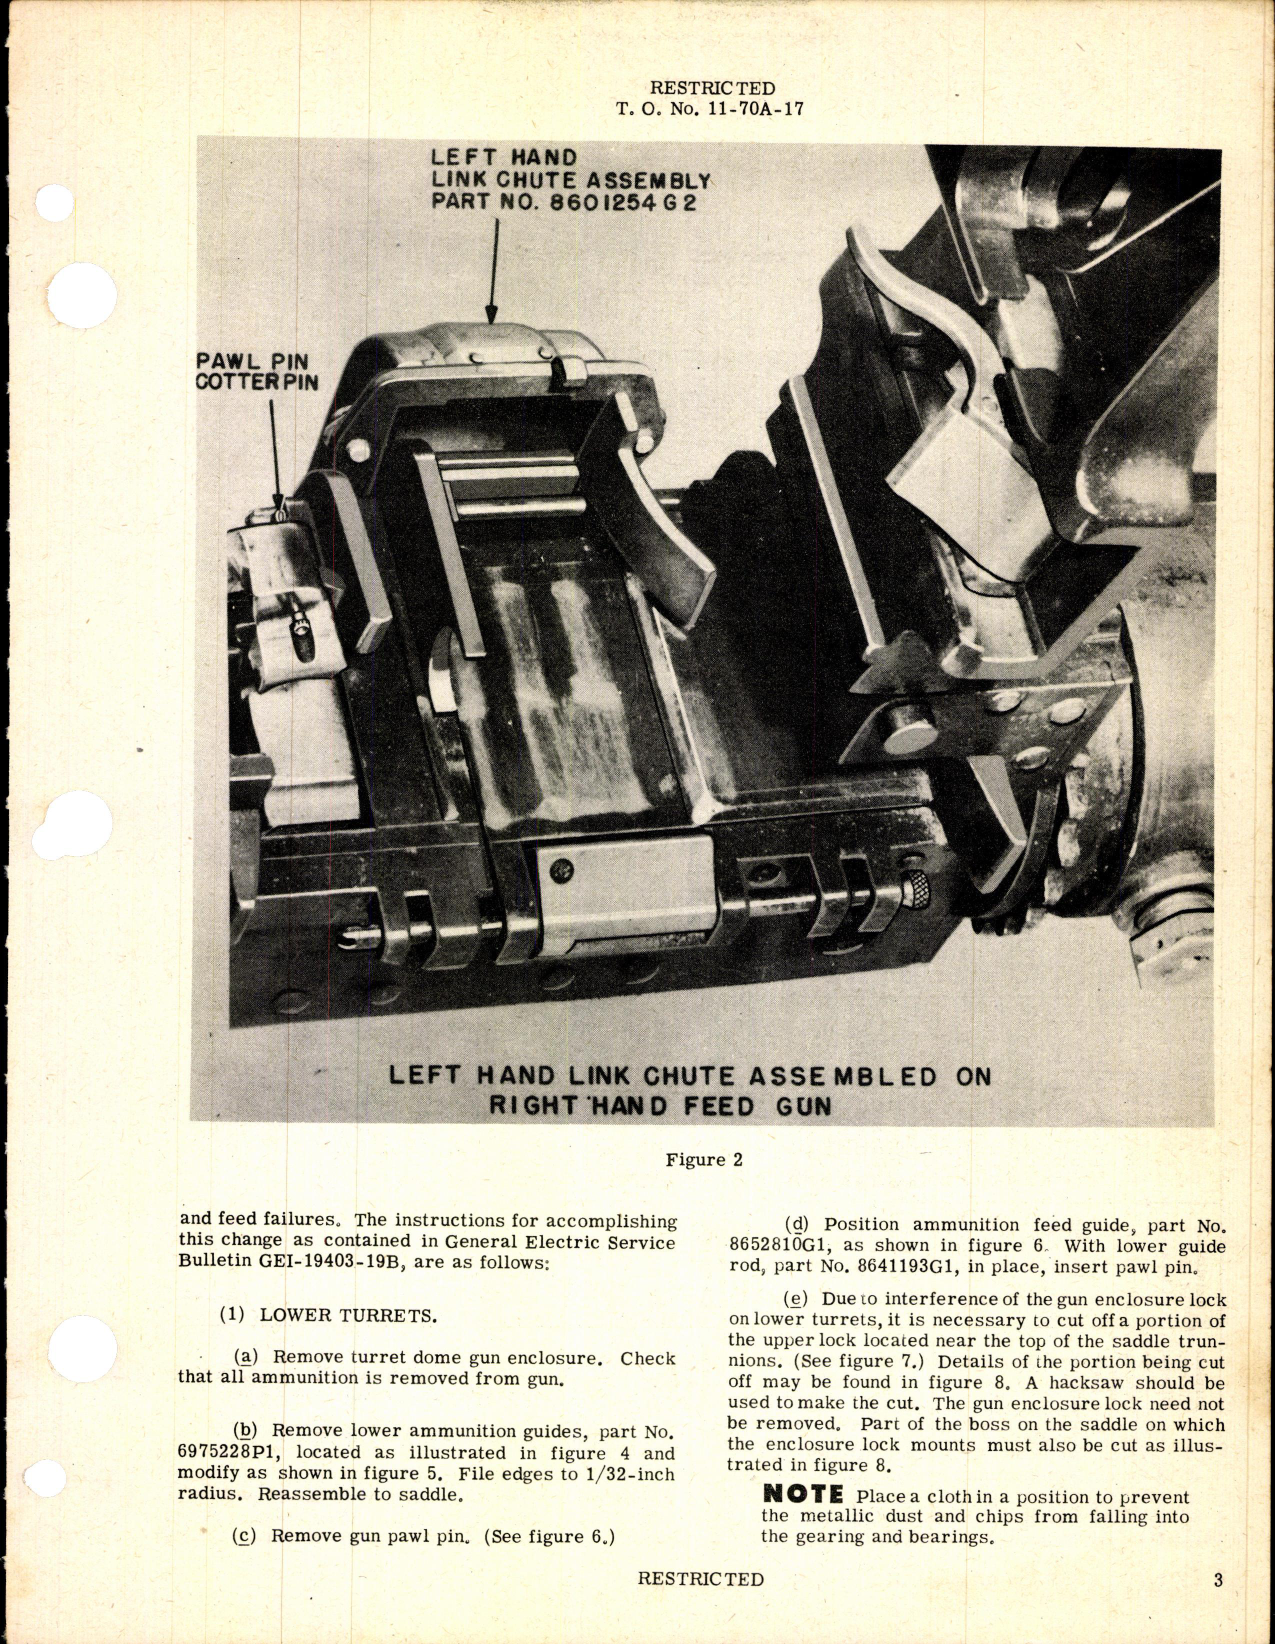 Sample page 3 from AirCorps Library document: Modification of Feed and Ejection Mechanism